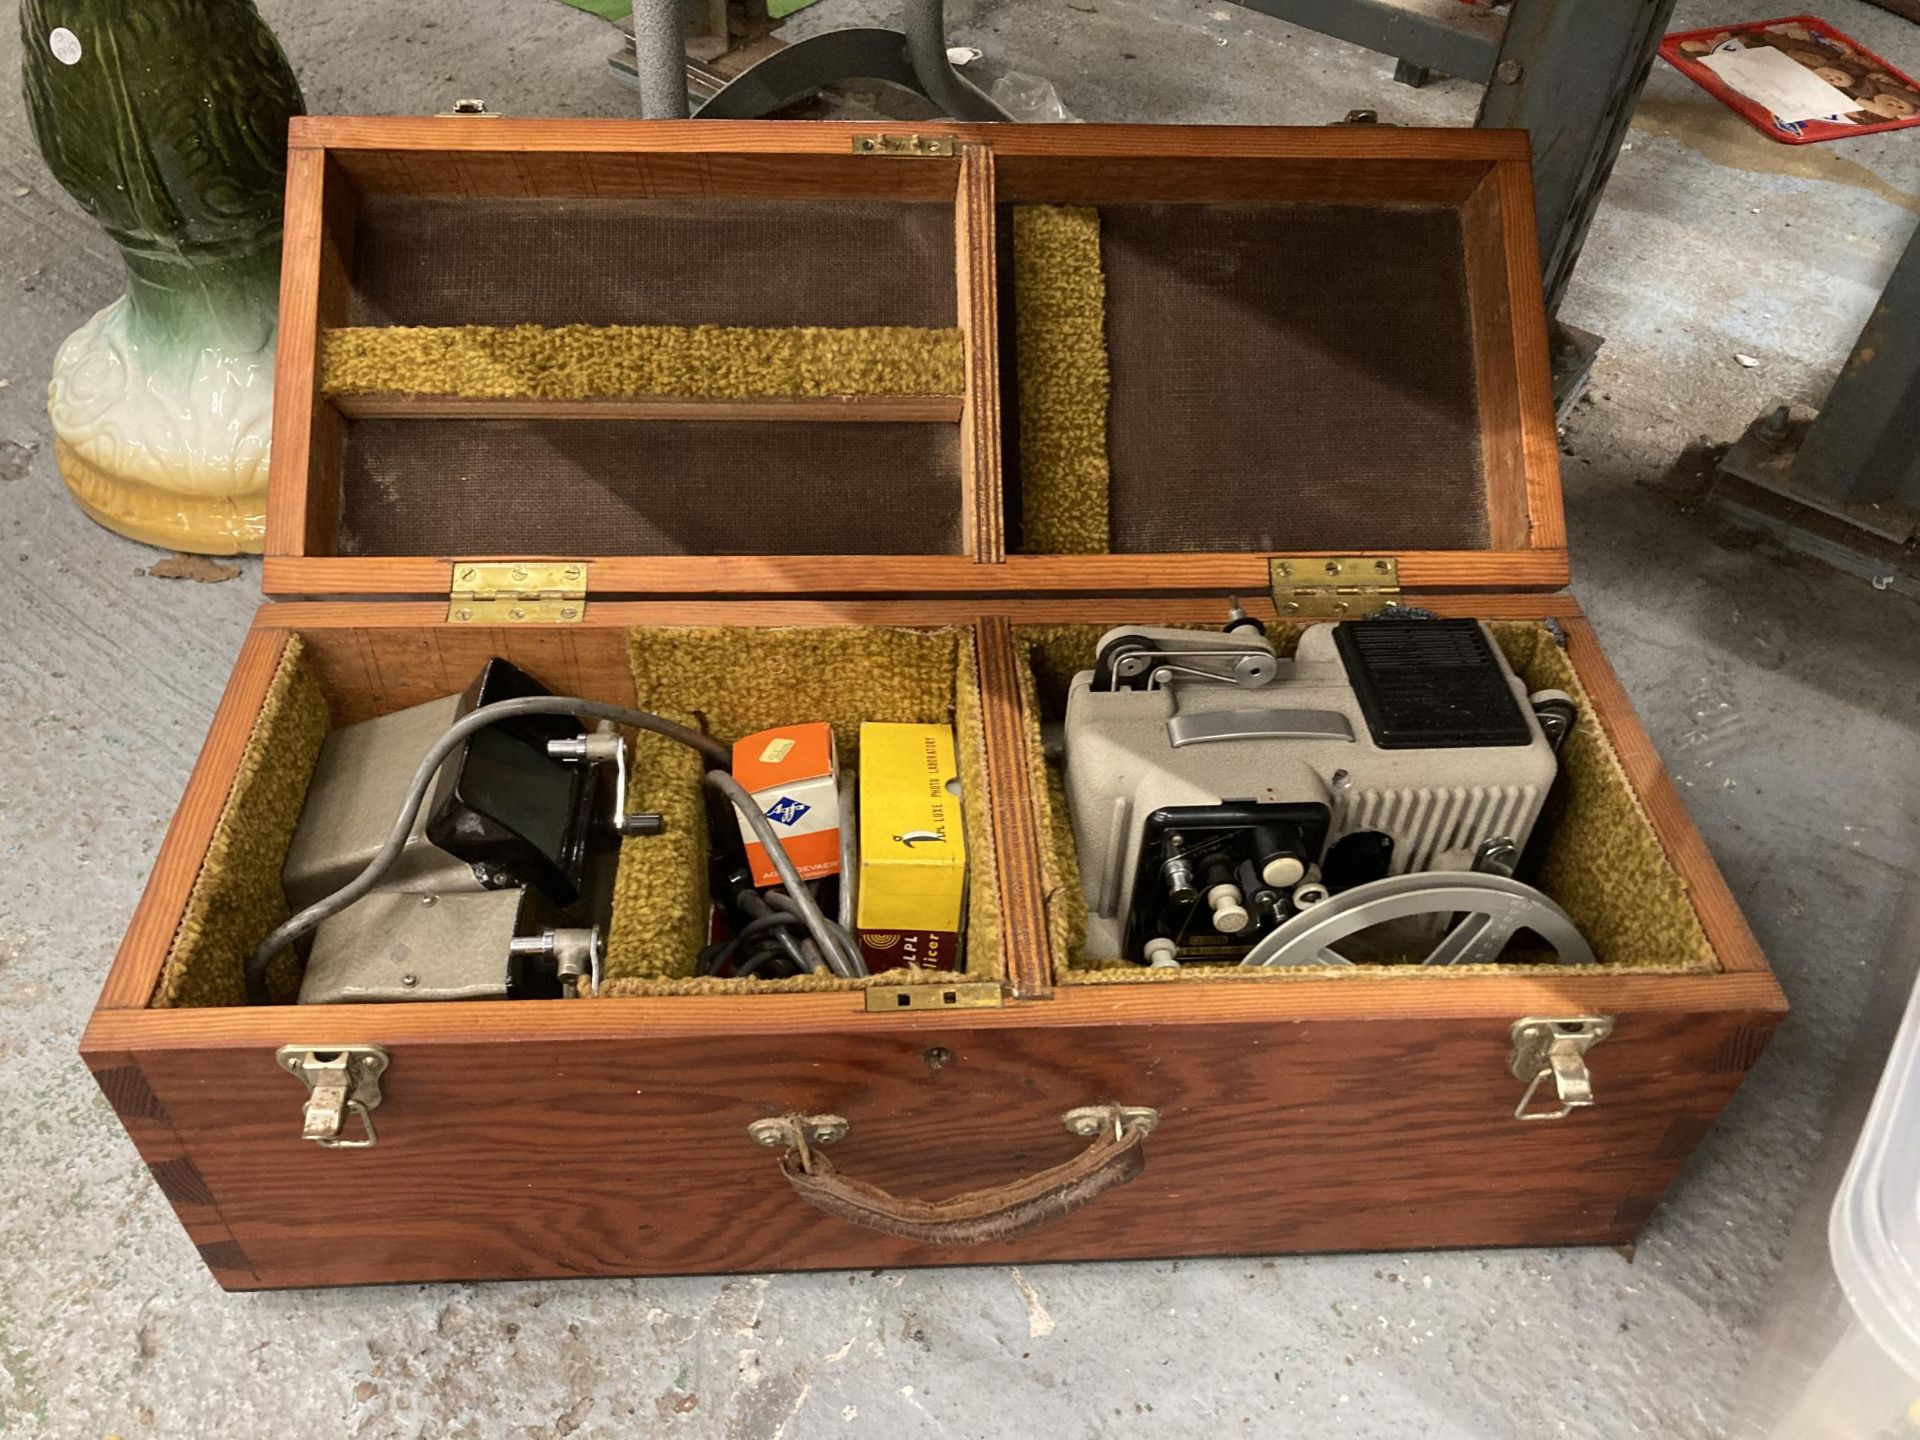 A CINE CAMERA IN A WOODEN CARRY BOX